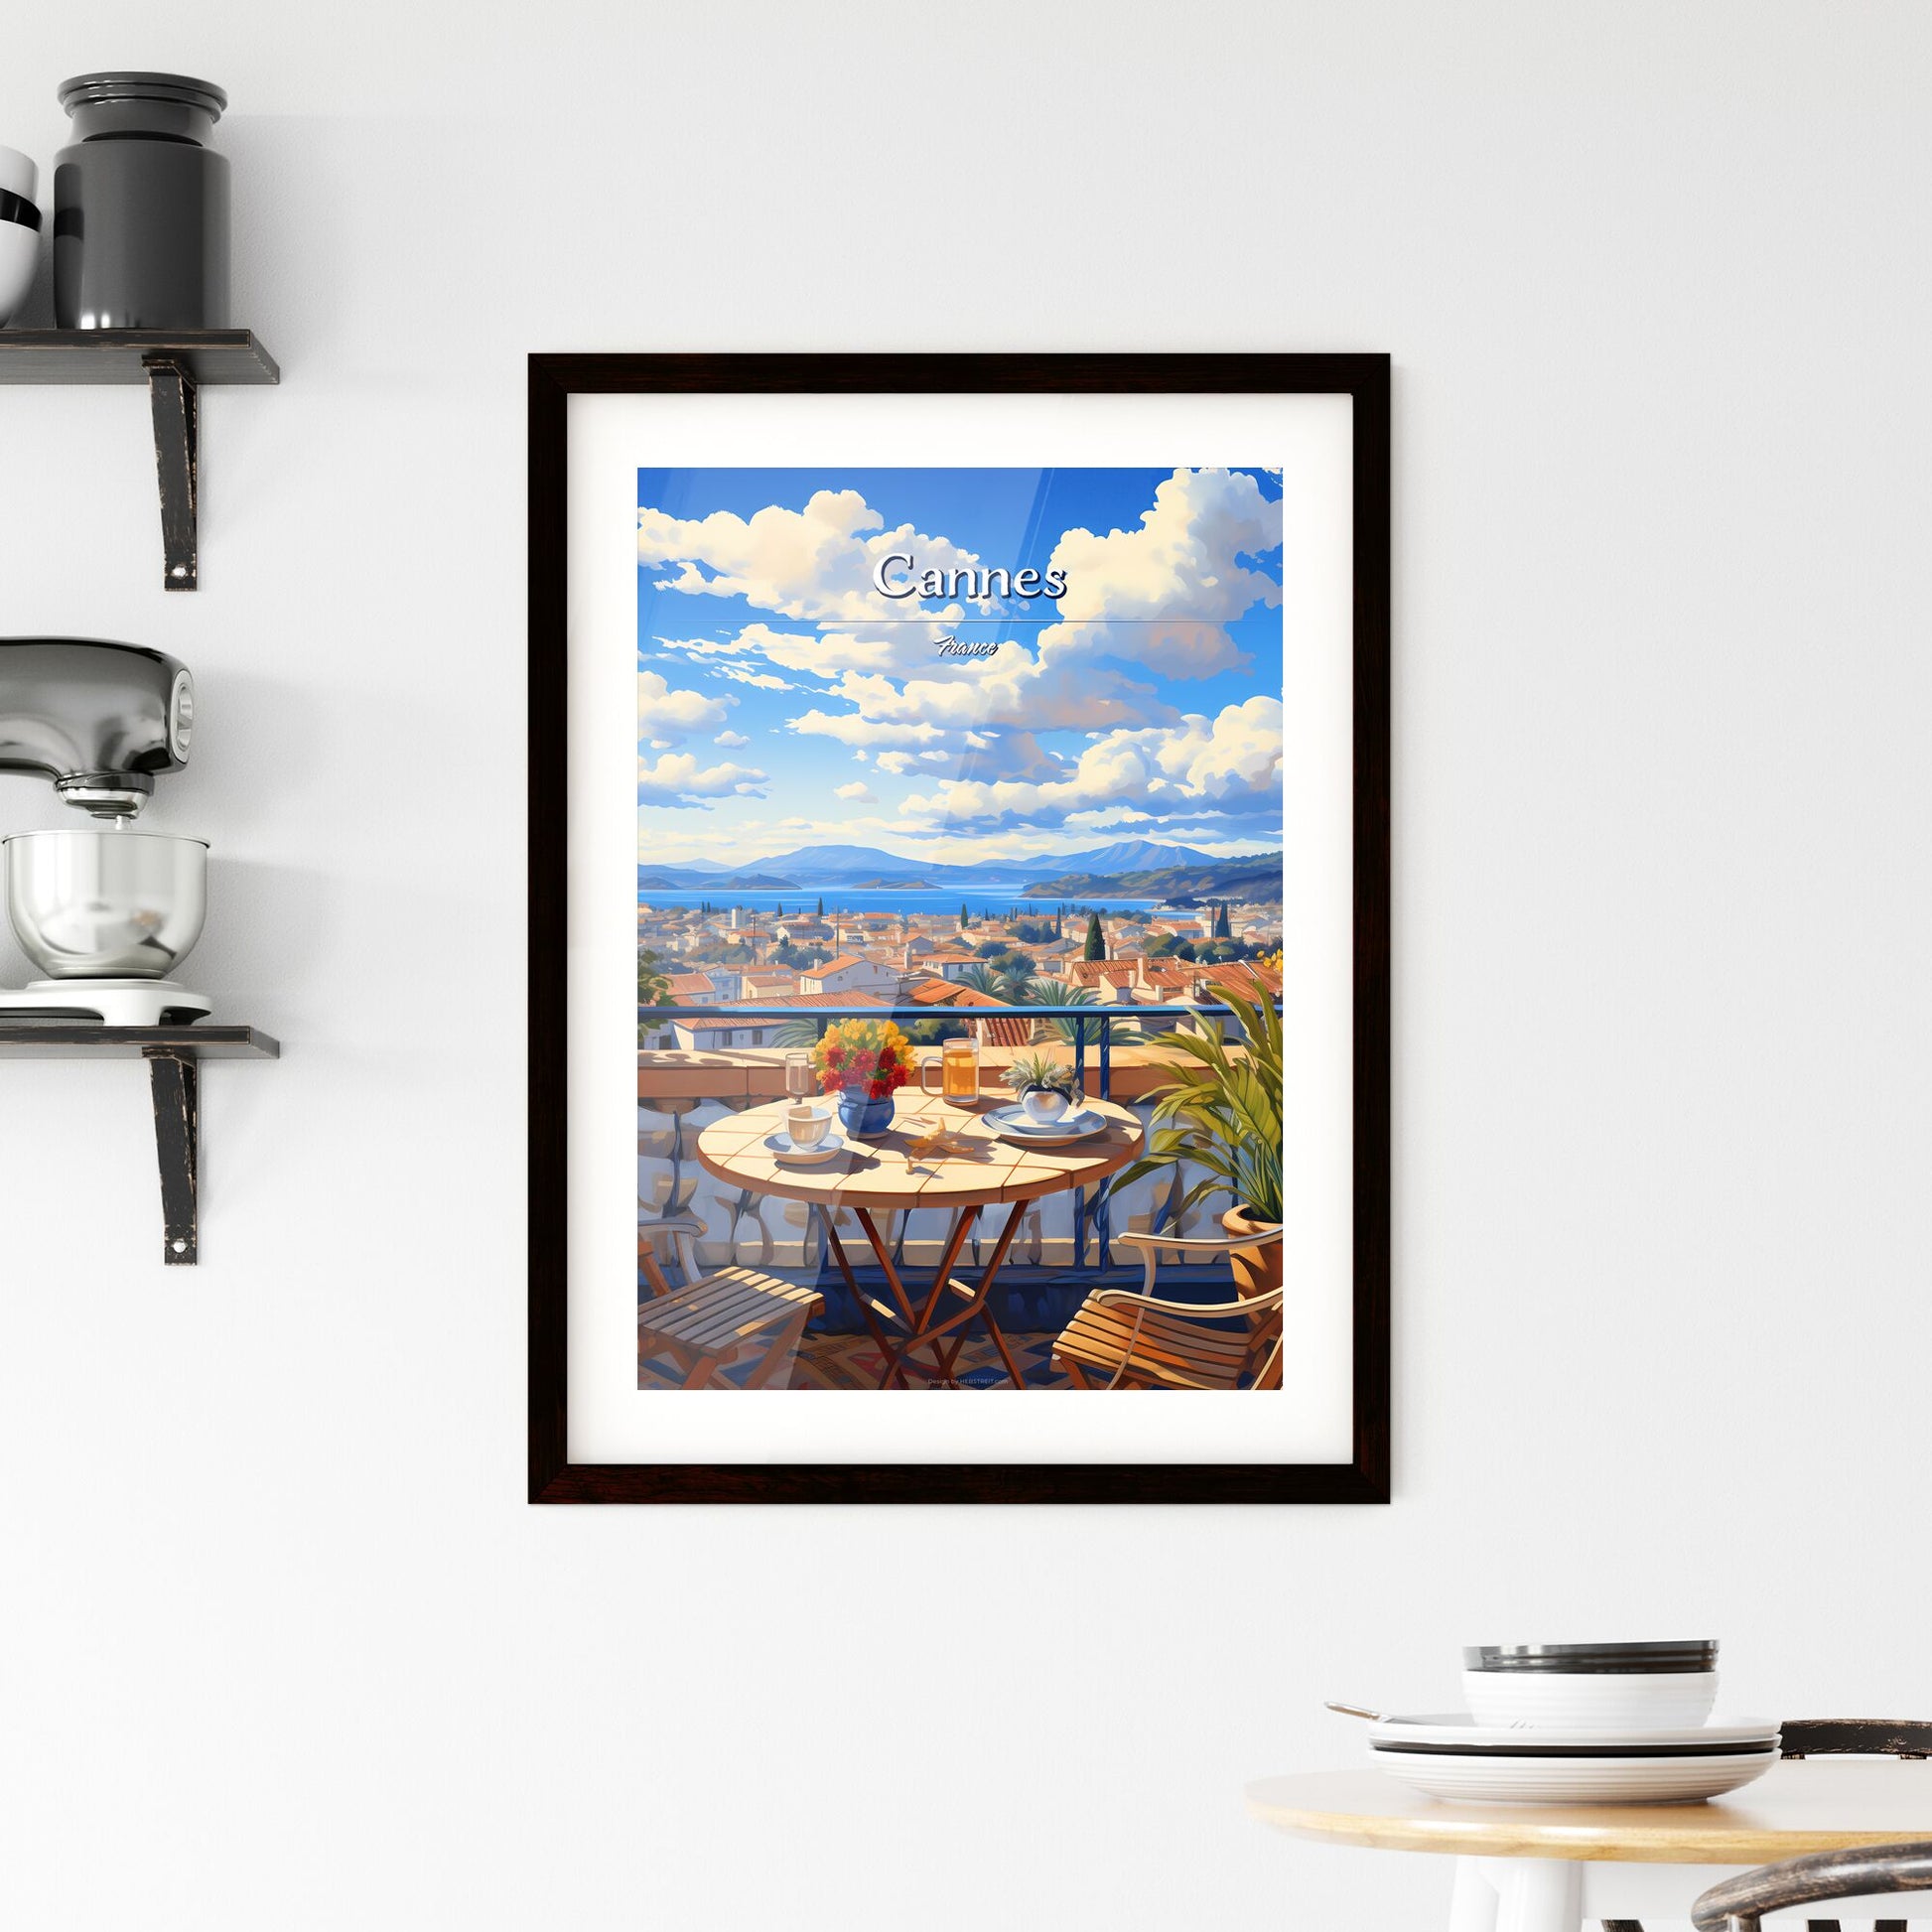 On the roofs of Cannes, France - Art print of a table and chairs on a balcony overlooking a city Default Title